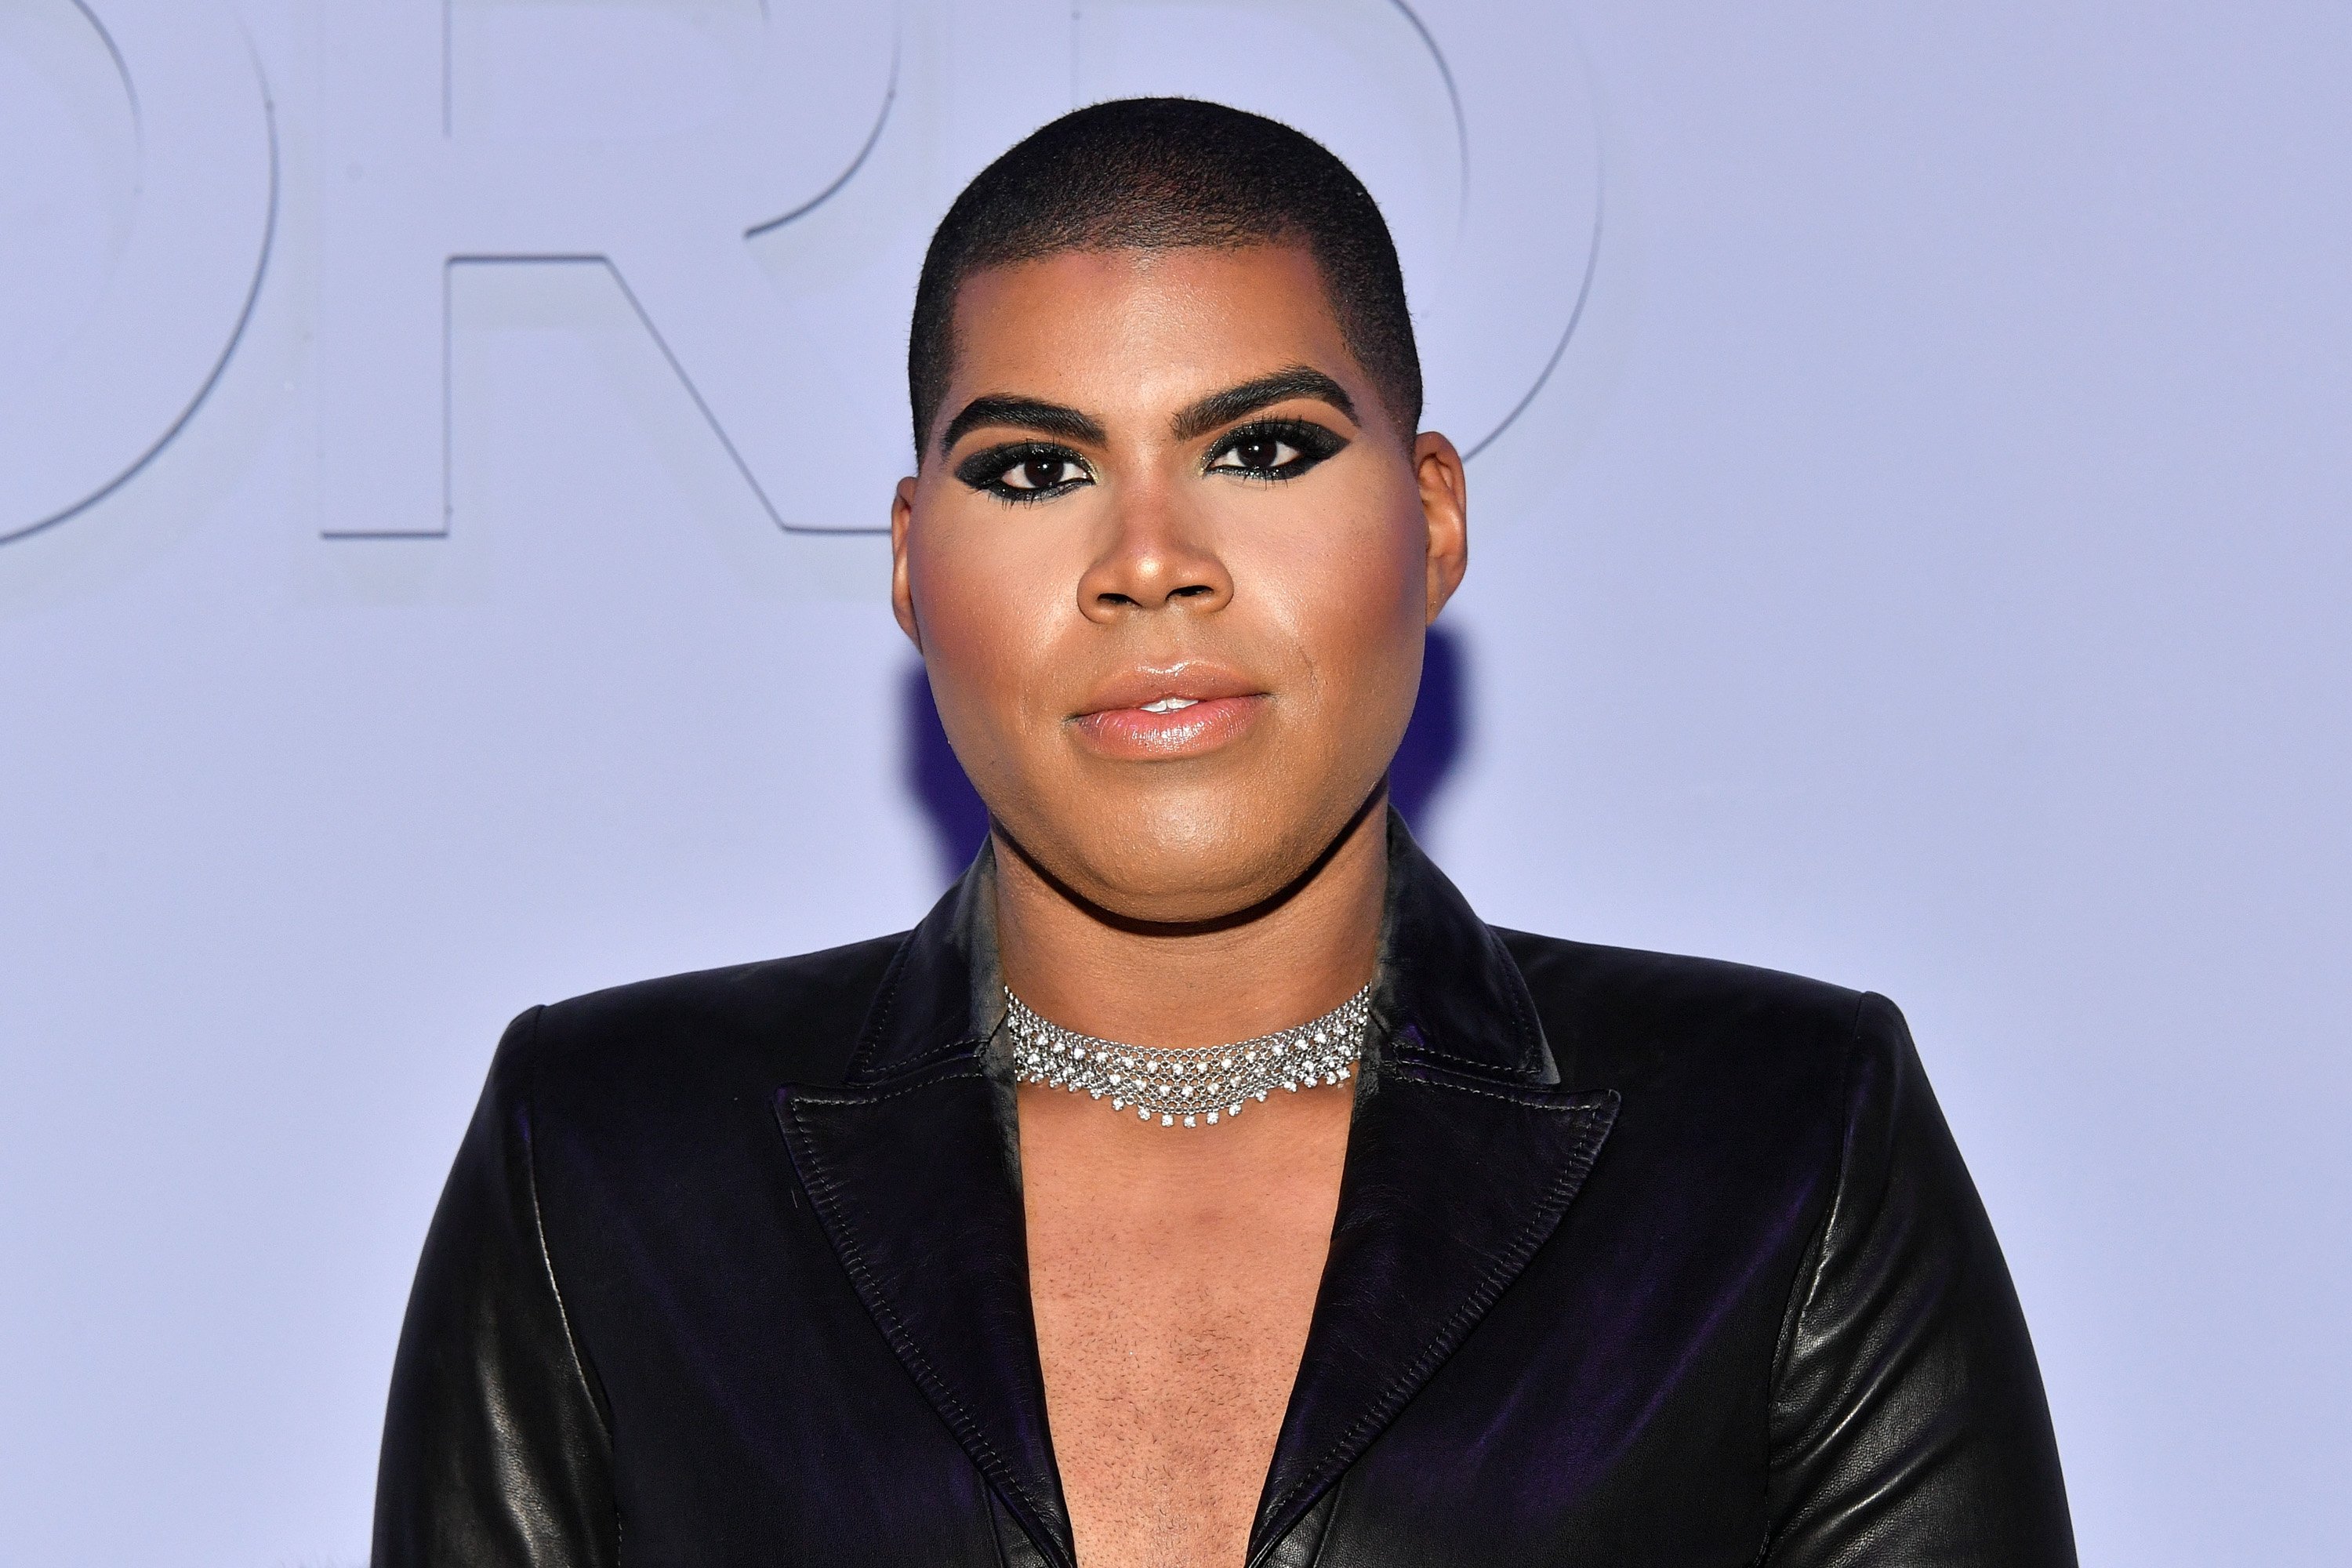 EJ Johnson at the Tom Ford Women's Fall/Winter 2018 fashion show during New York Fashion Week on February 8, 2018. | Source: Getty Images